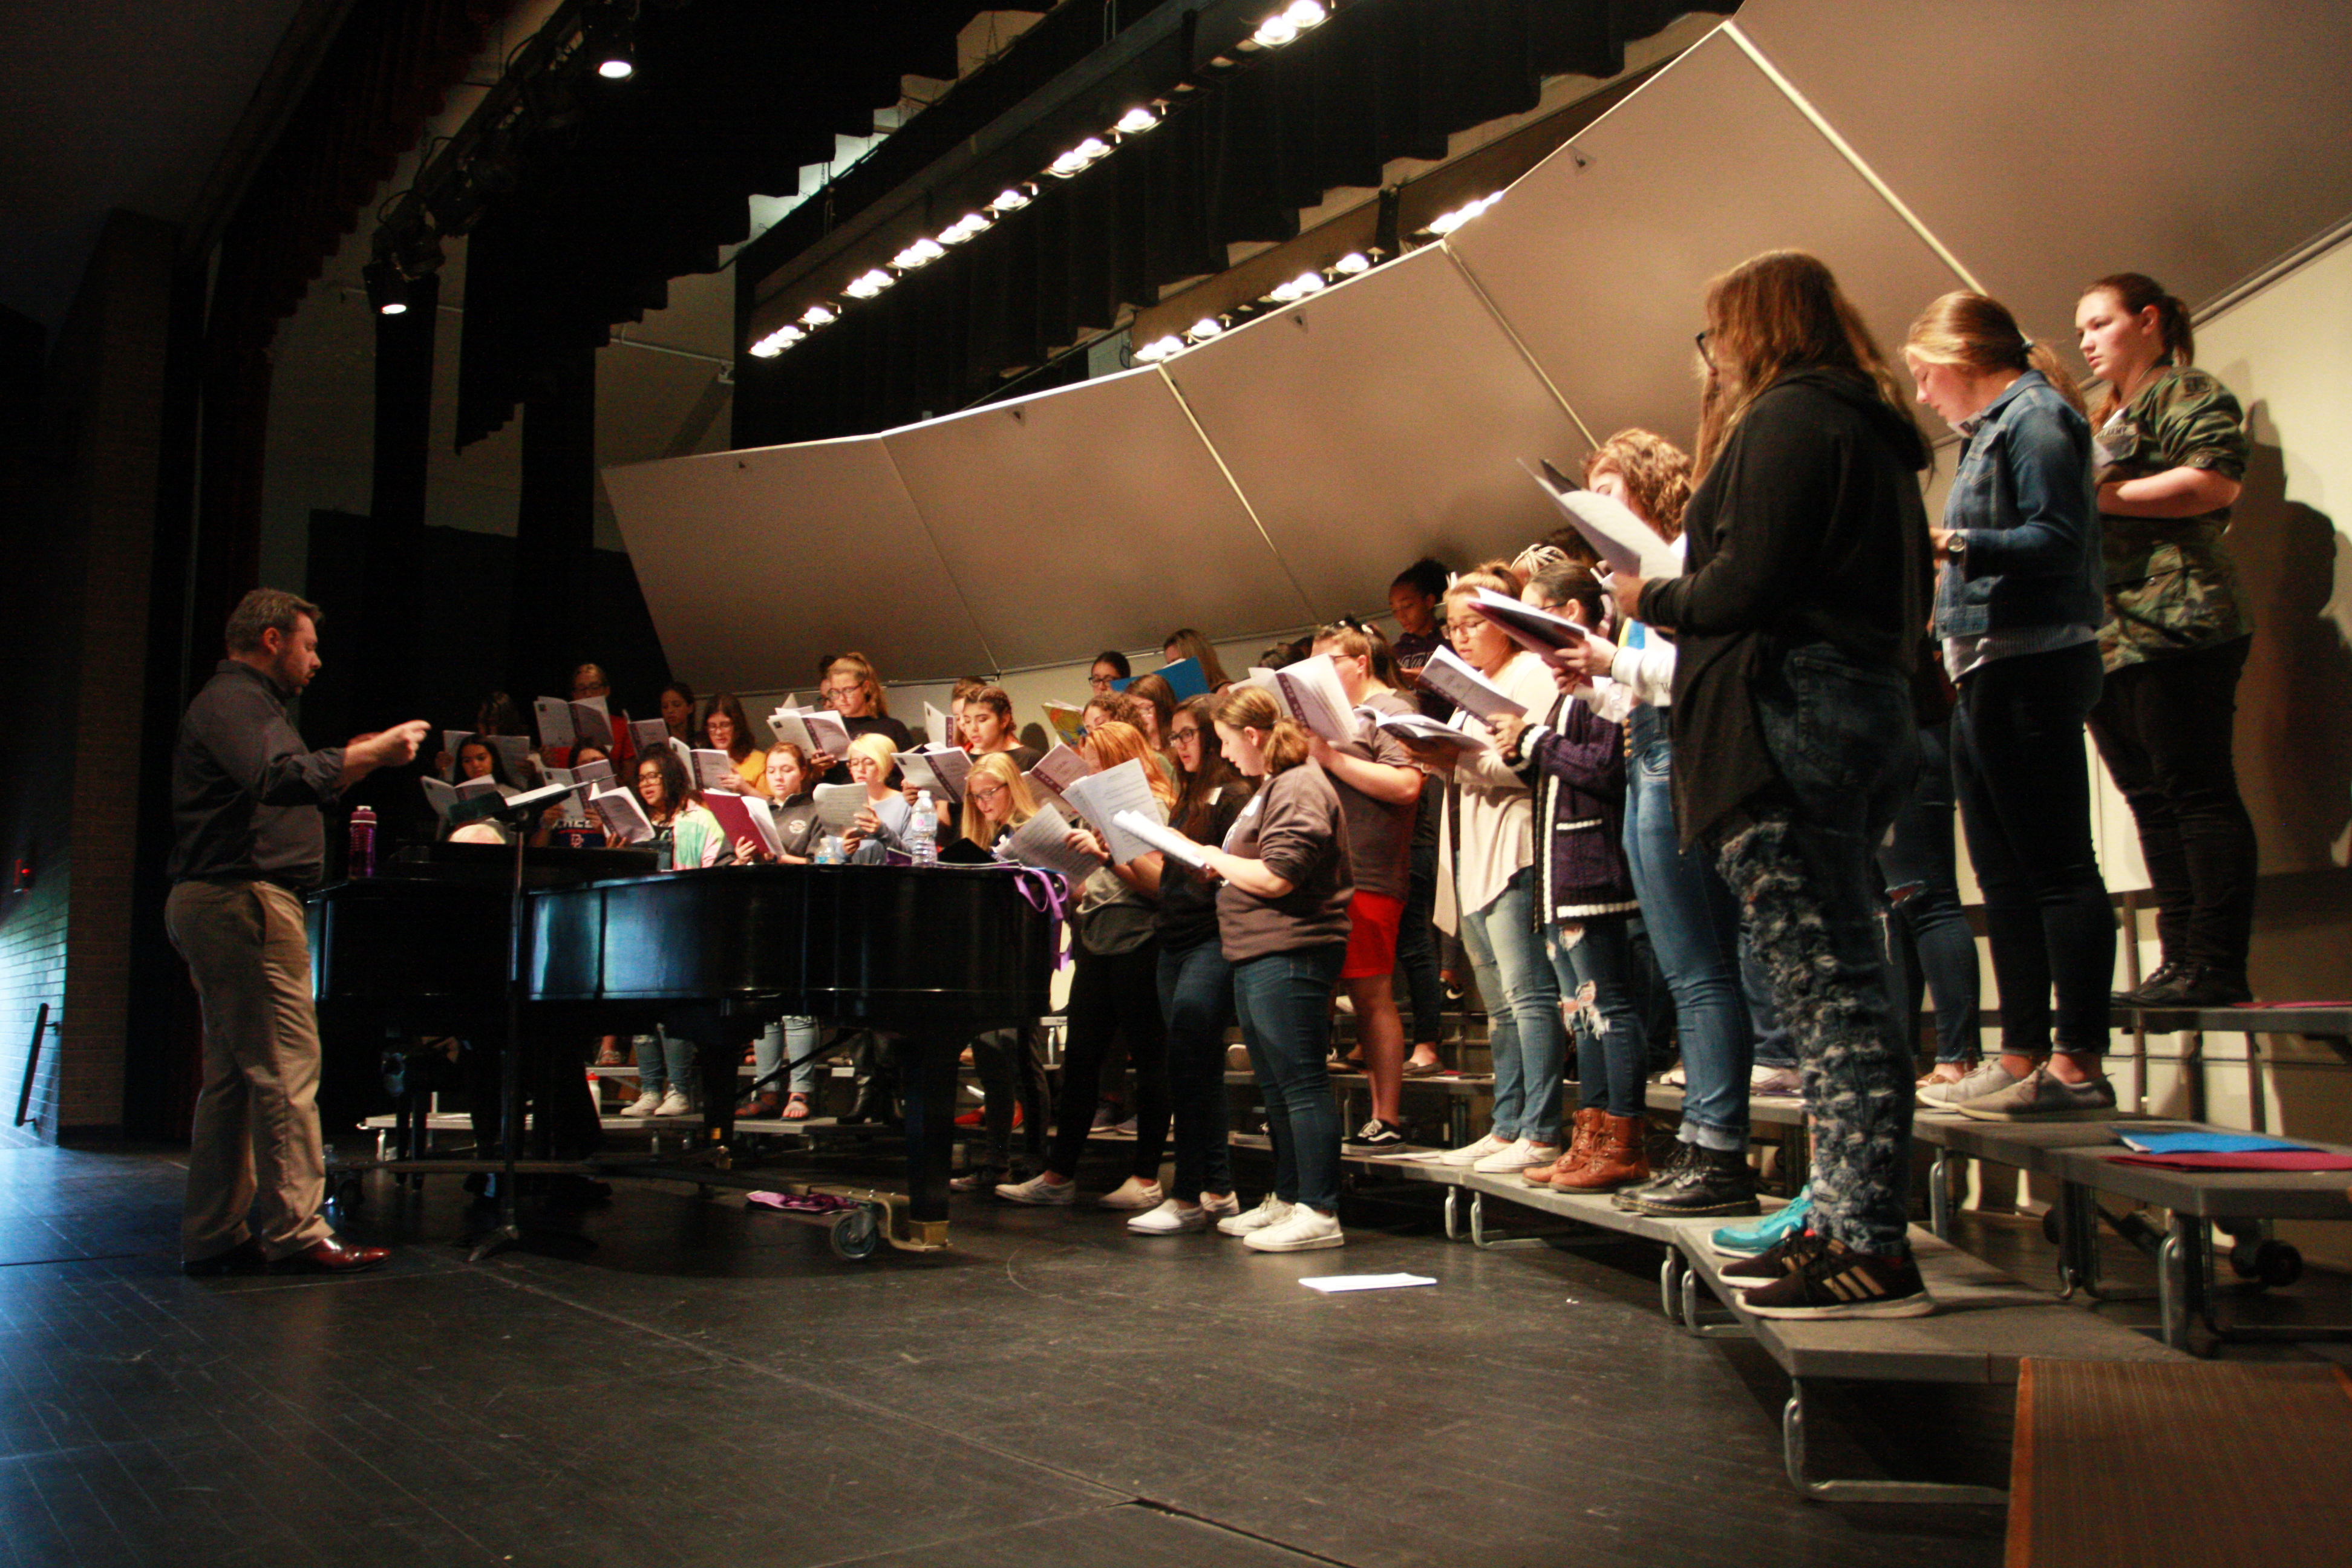 Professor Kerry Kuplic directing high school singers during the State Choir Audition workshop